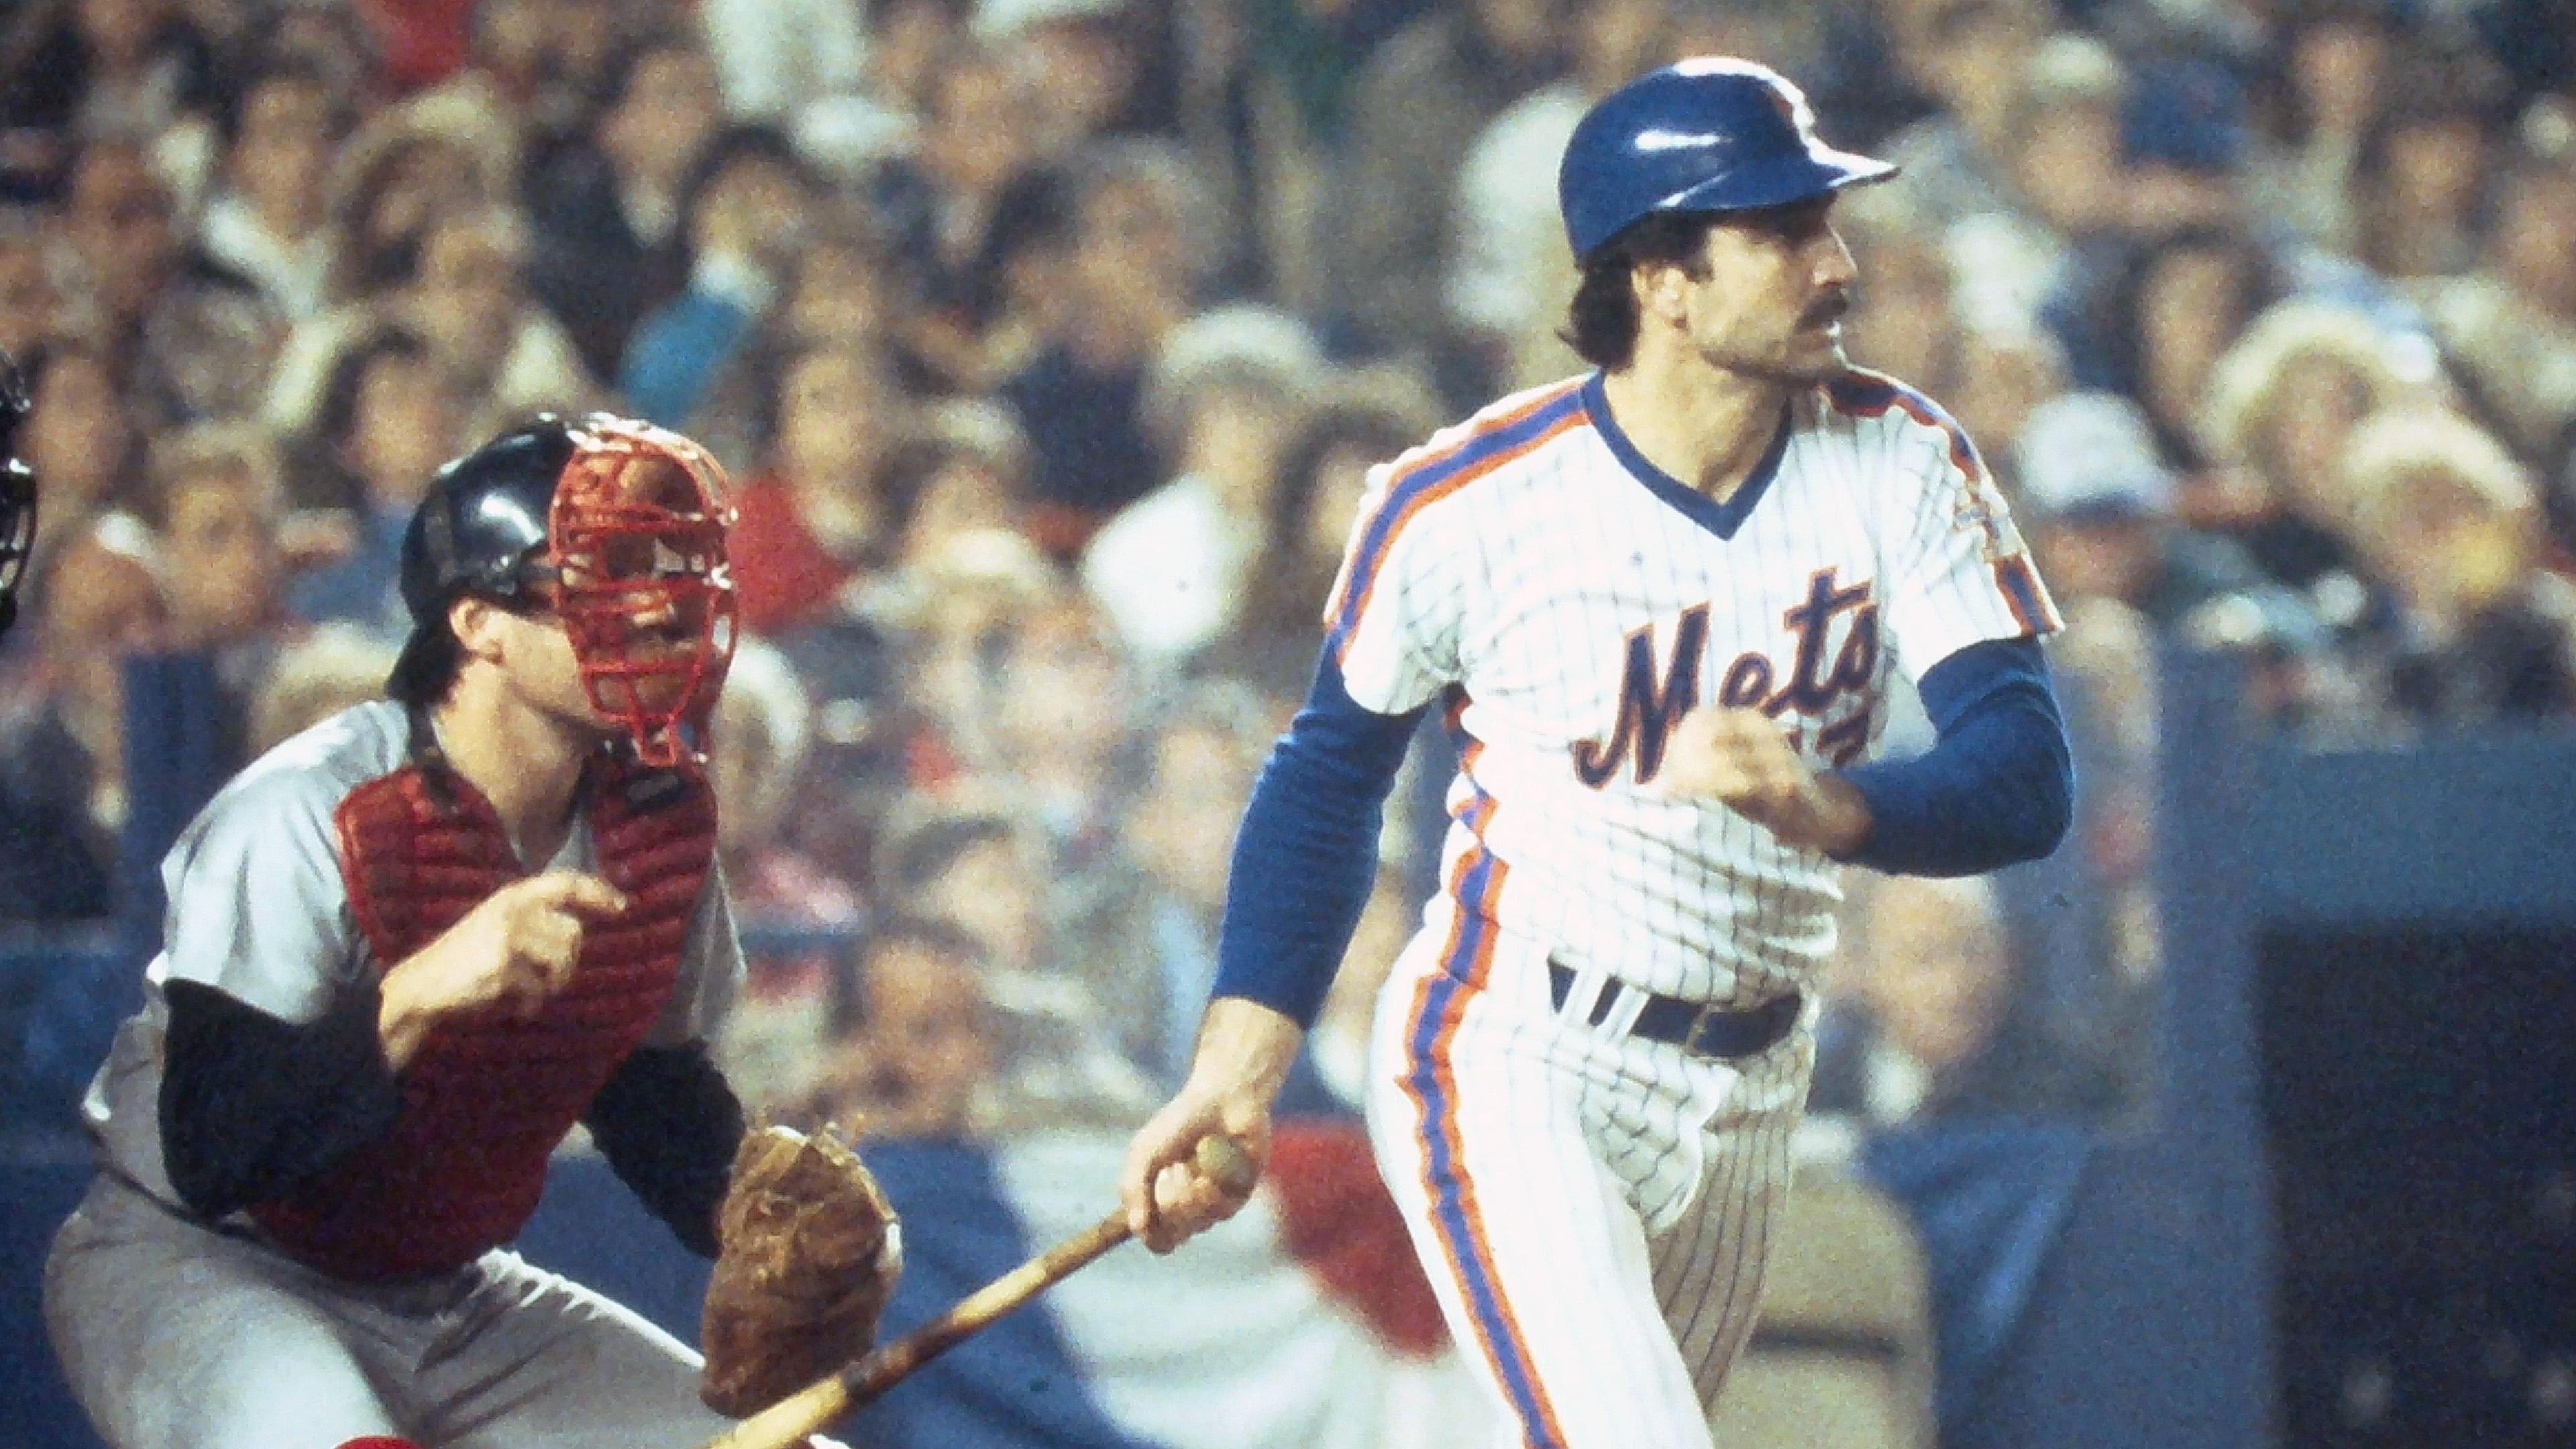 Keith Hernandez hits an RBI single in the sixth inning scoring Mookie Wilson and Lee Mazzilli cutting the Red Sox lead to 3-2 in Game 7 of the World Series at Shea Stadium Oct. 27, 1986 / Frank Becerra Jr/USA TODAY / USA TODAY NETWORK